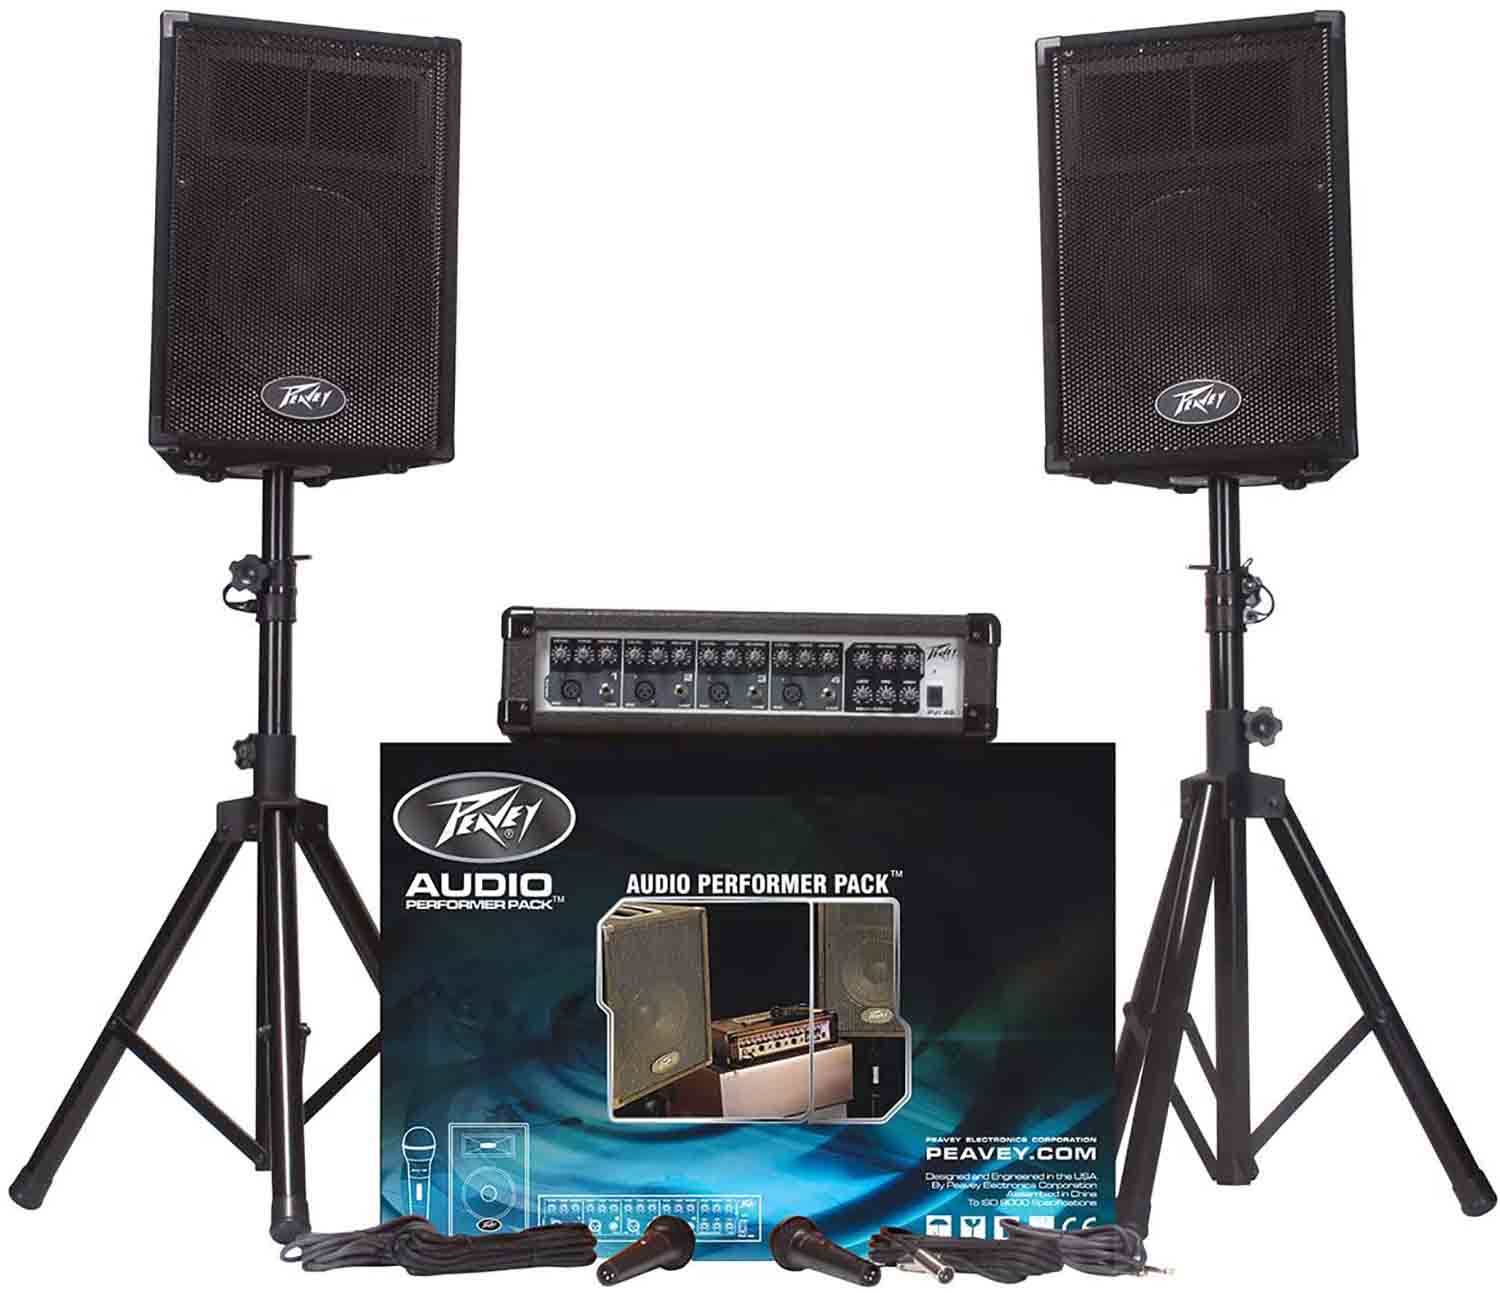 Peavey Audio Performer Pack Complete Portable PA System - Hollywood DJ